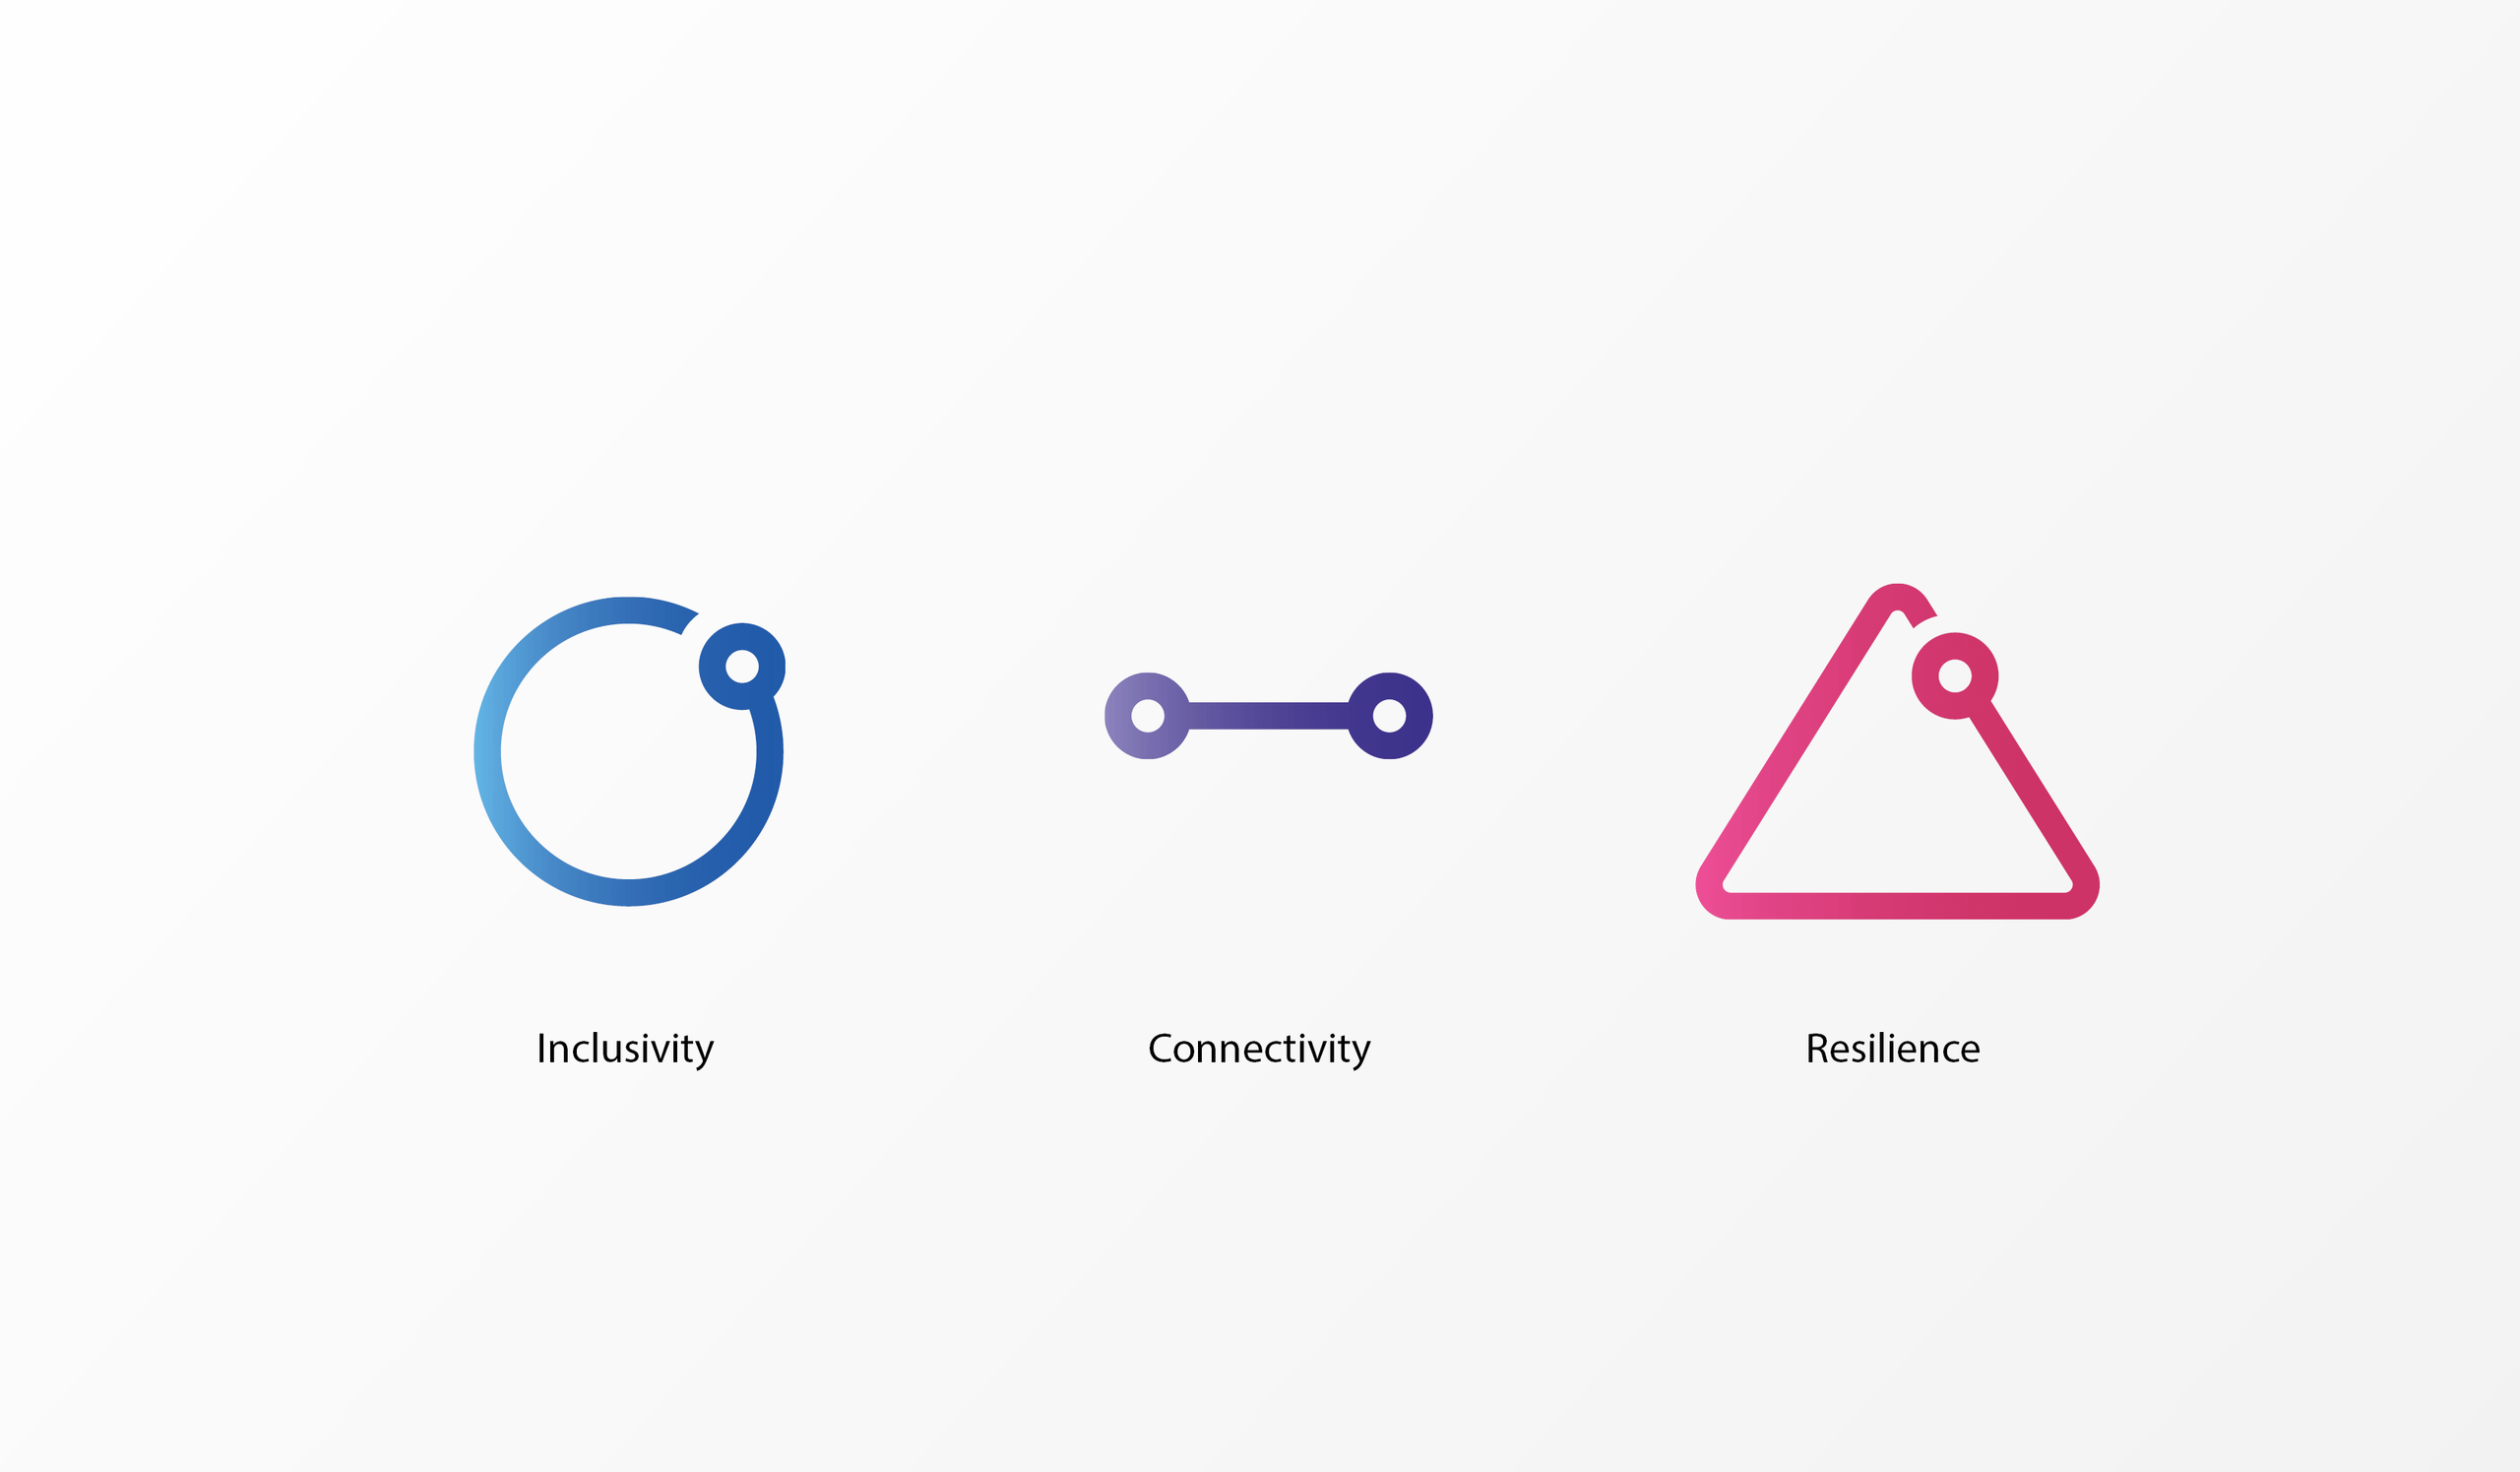 a blue circle captioned "Inclusivity", a purple line captioned "Connectivity", and a pink triangle captioned "Resilience"